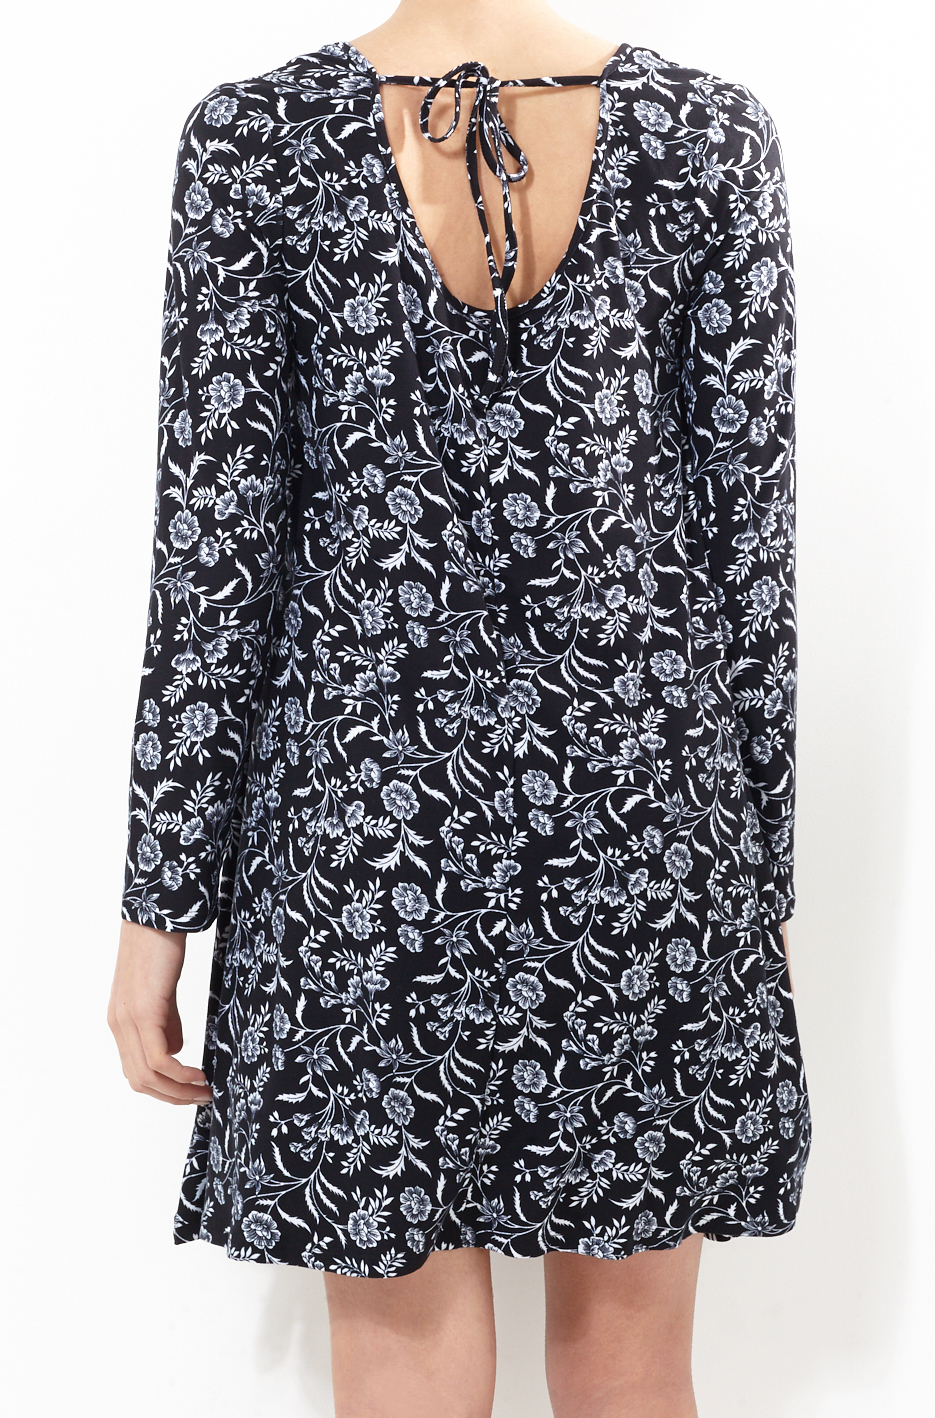 Brave Soul London Dark Paisley Print Low Tie Back Dress S RRP 29.99 CLEARANCE XL 2.99 or 2 for 5